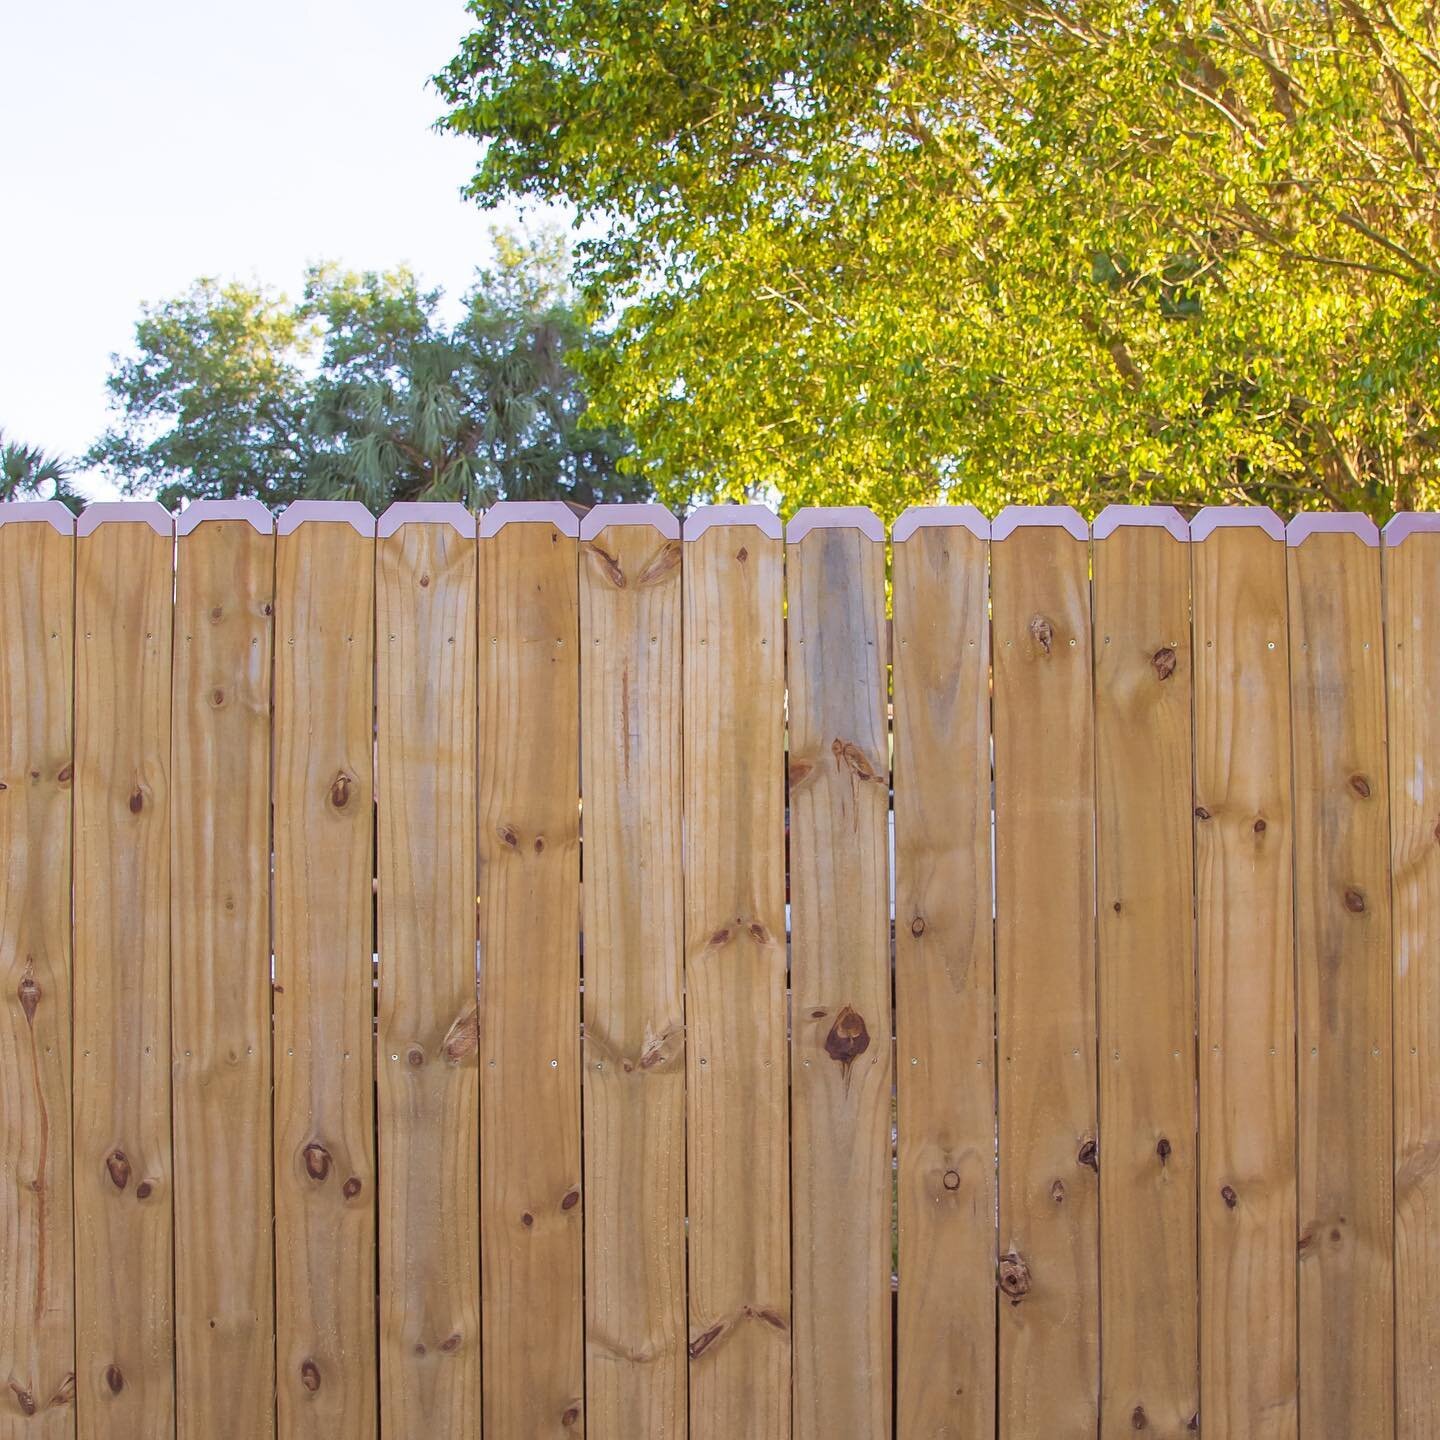 These FencyCaps will enhance the look of your yard and preserve the fence tops from decay and weather.